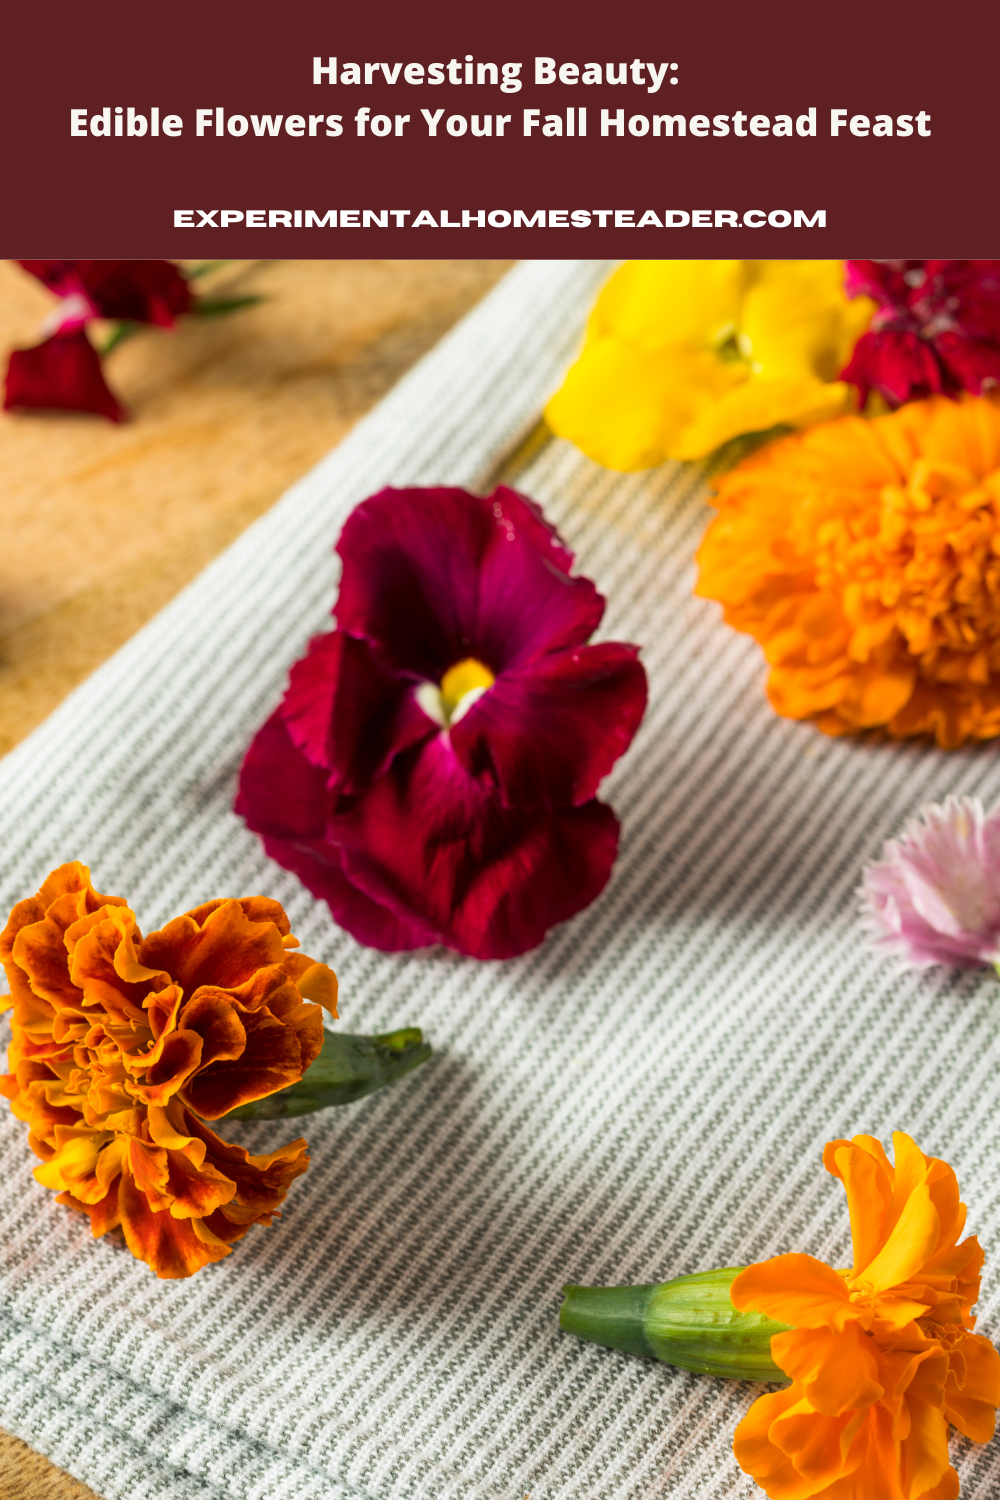 Marigolds and pansies laid out on a towel to dry.